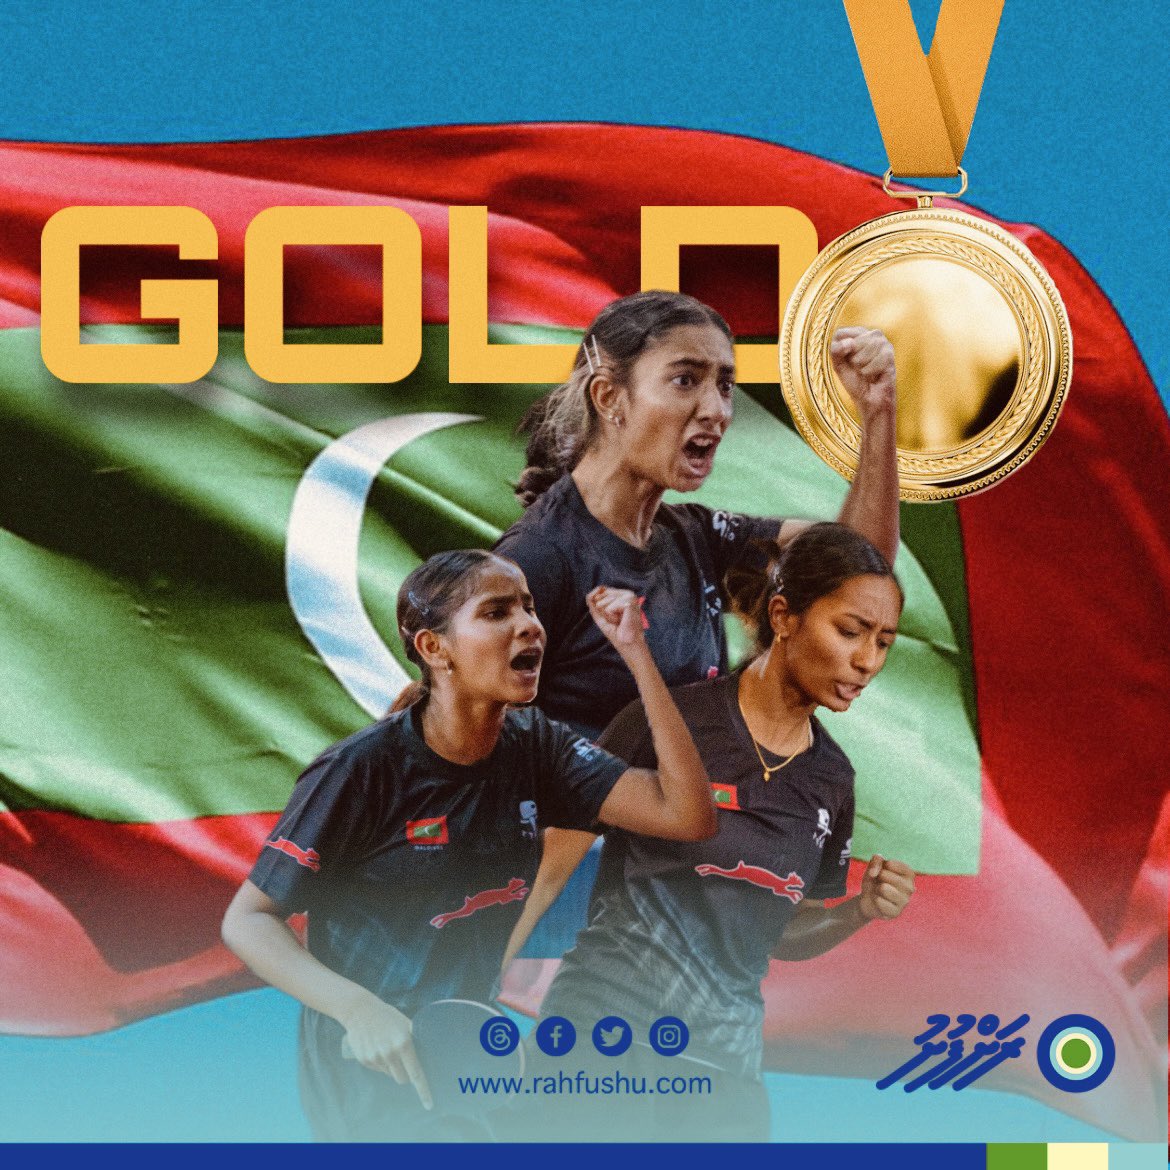 It’s GOLD once again! 🥇

The Maldivian women's TT team has once more won the IOIG gold medals. In today's finals, they defeated the Mauritius squad 3-1.

#IOIG2023